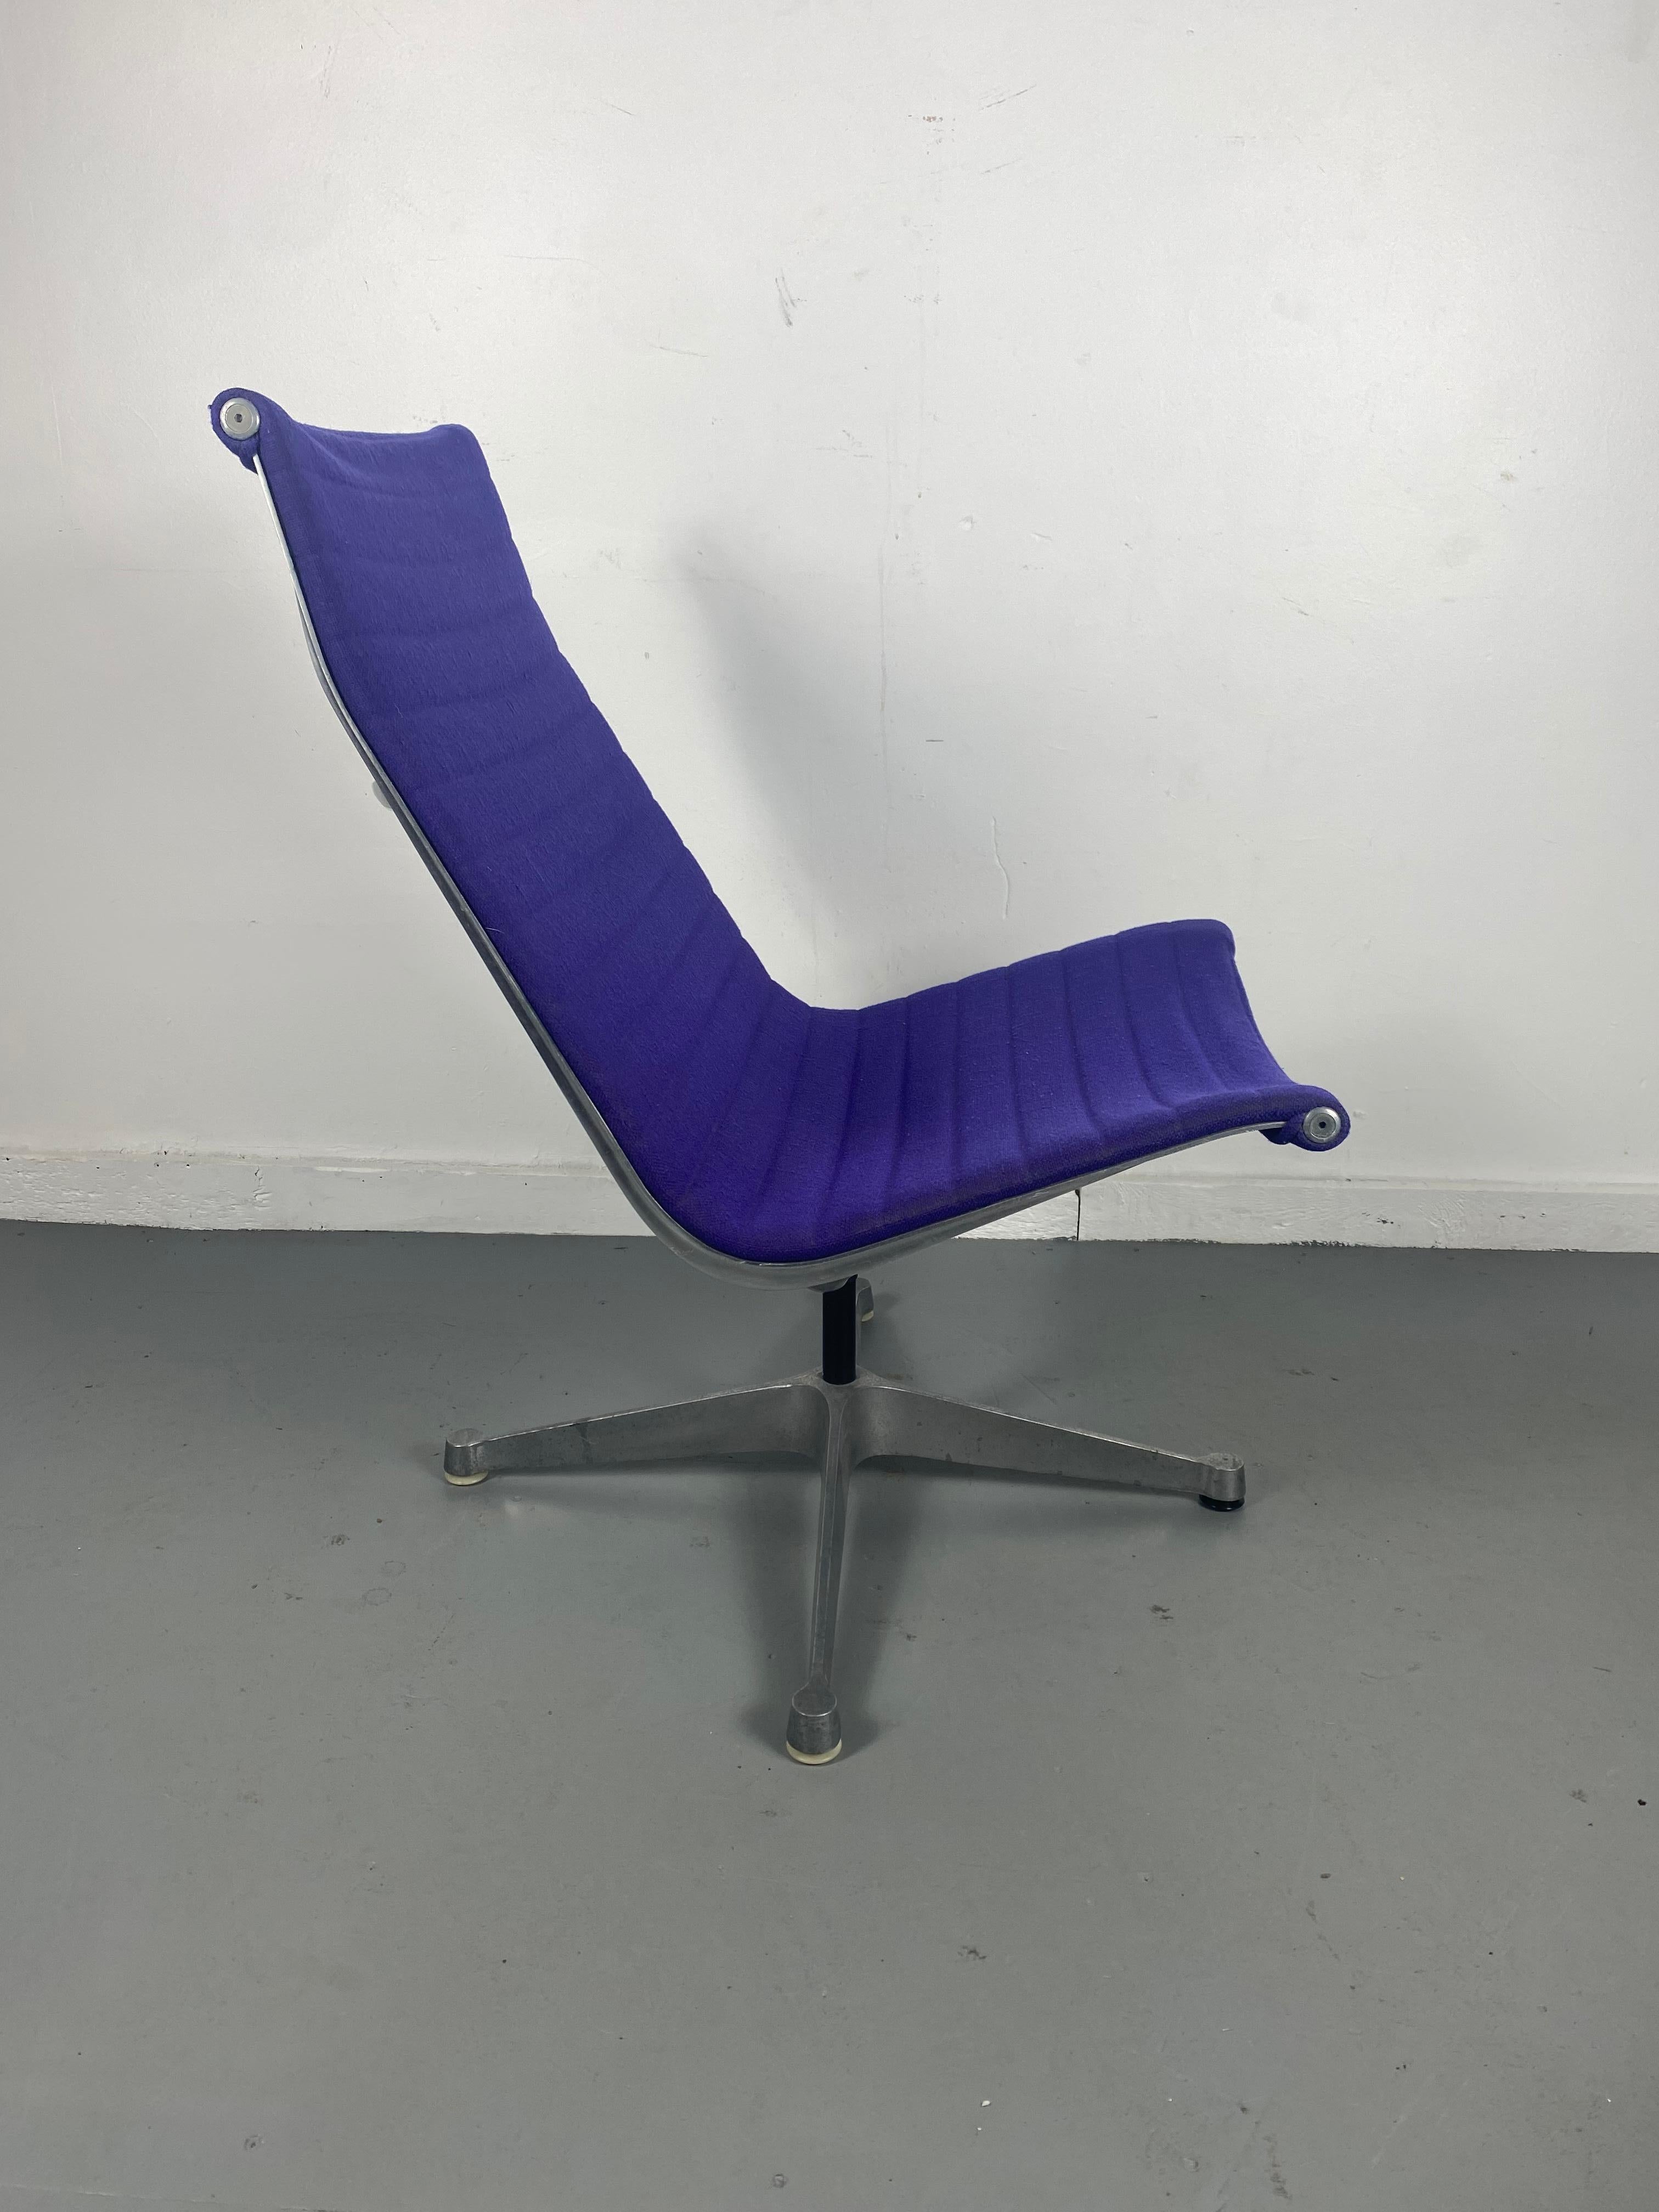 Early production charles & Ray Eames aluminum group lounge chair. Amazing purple wool fabric in great original condition, Signed with Herman Miller logo cast into frame.